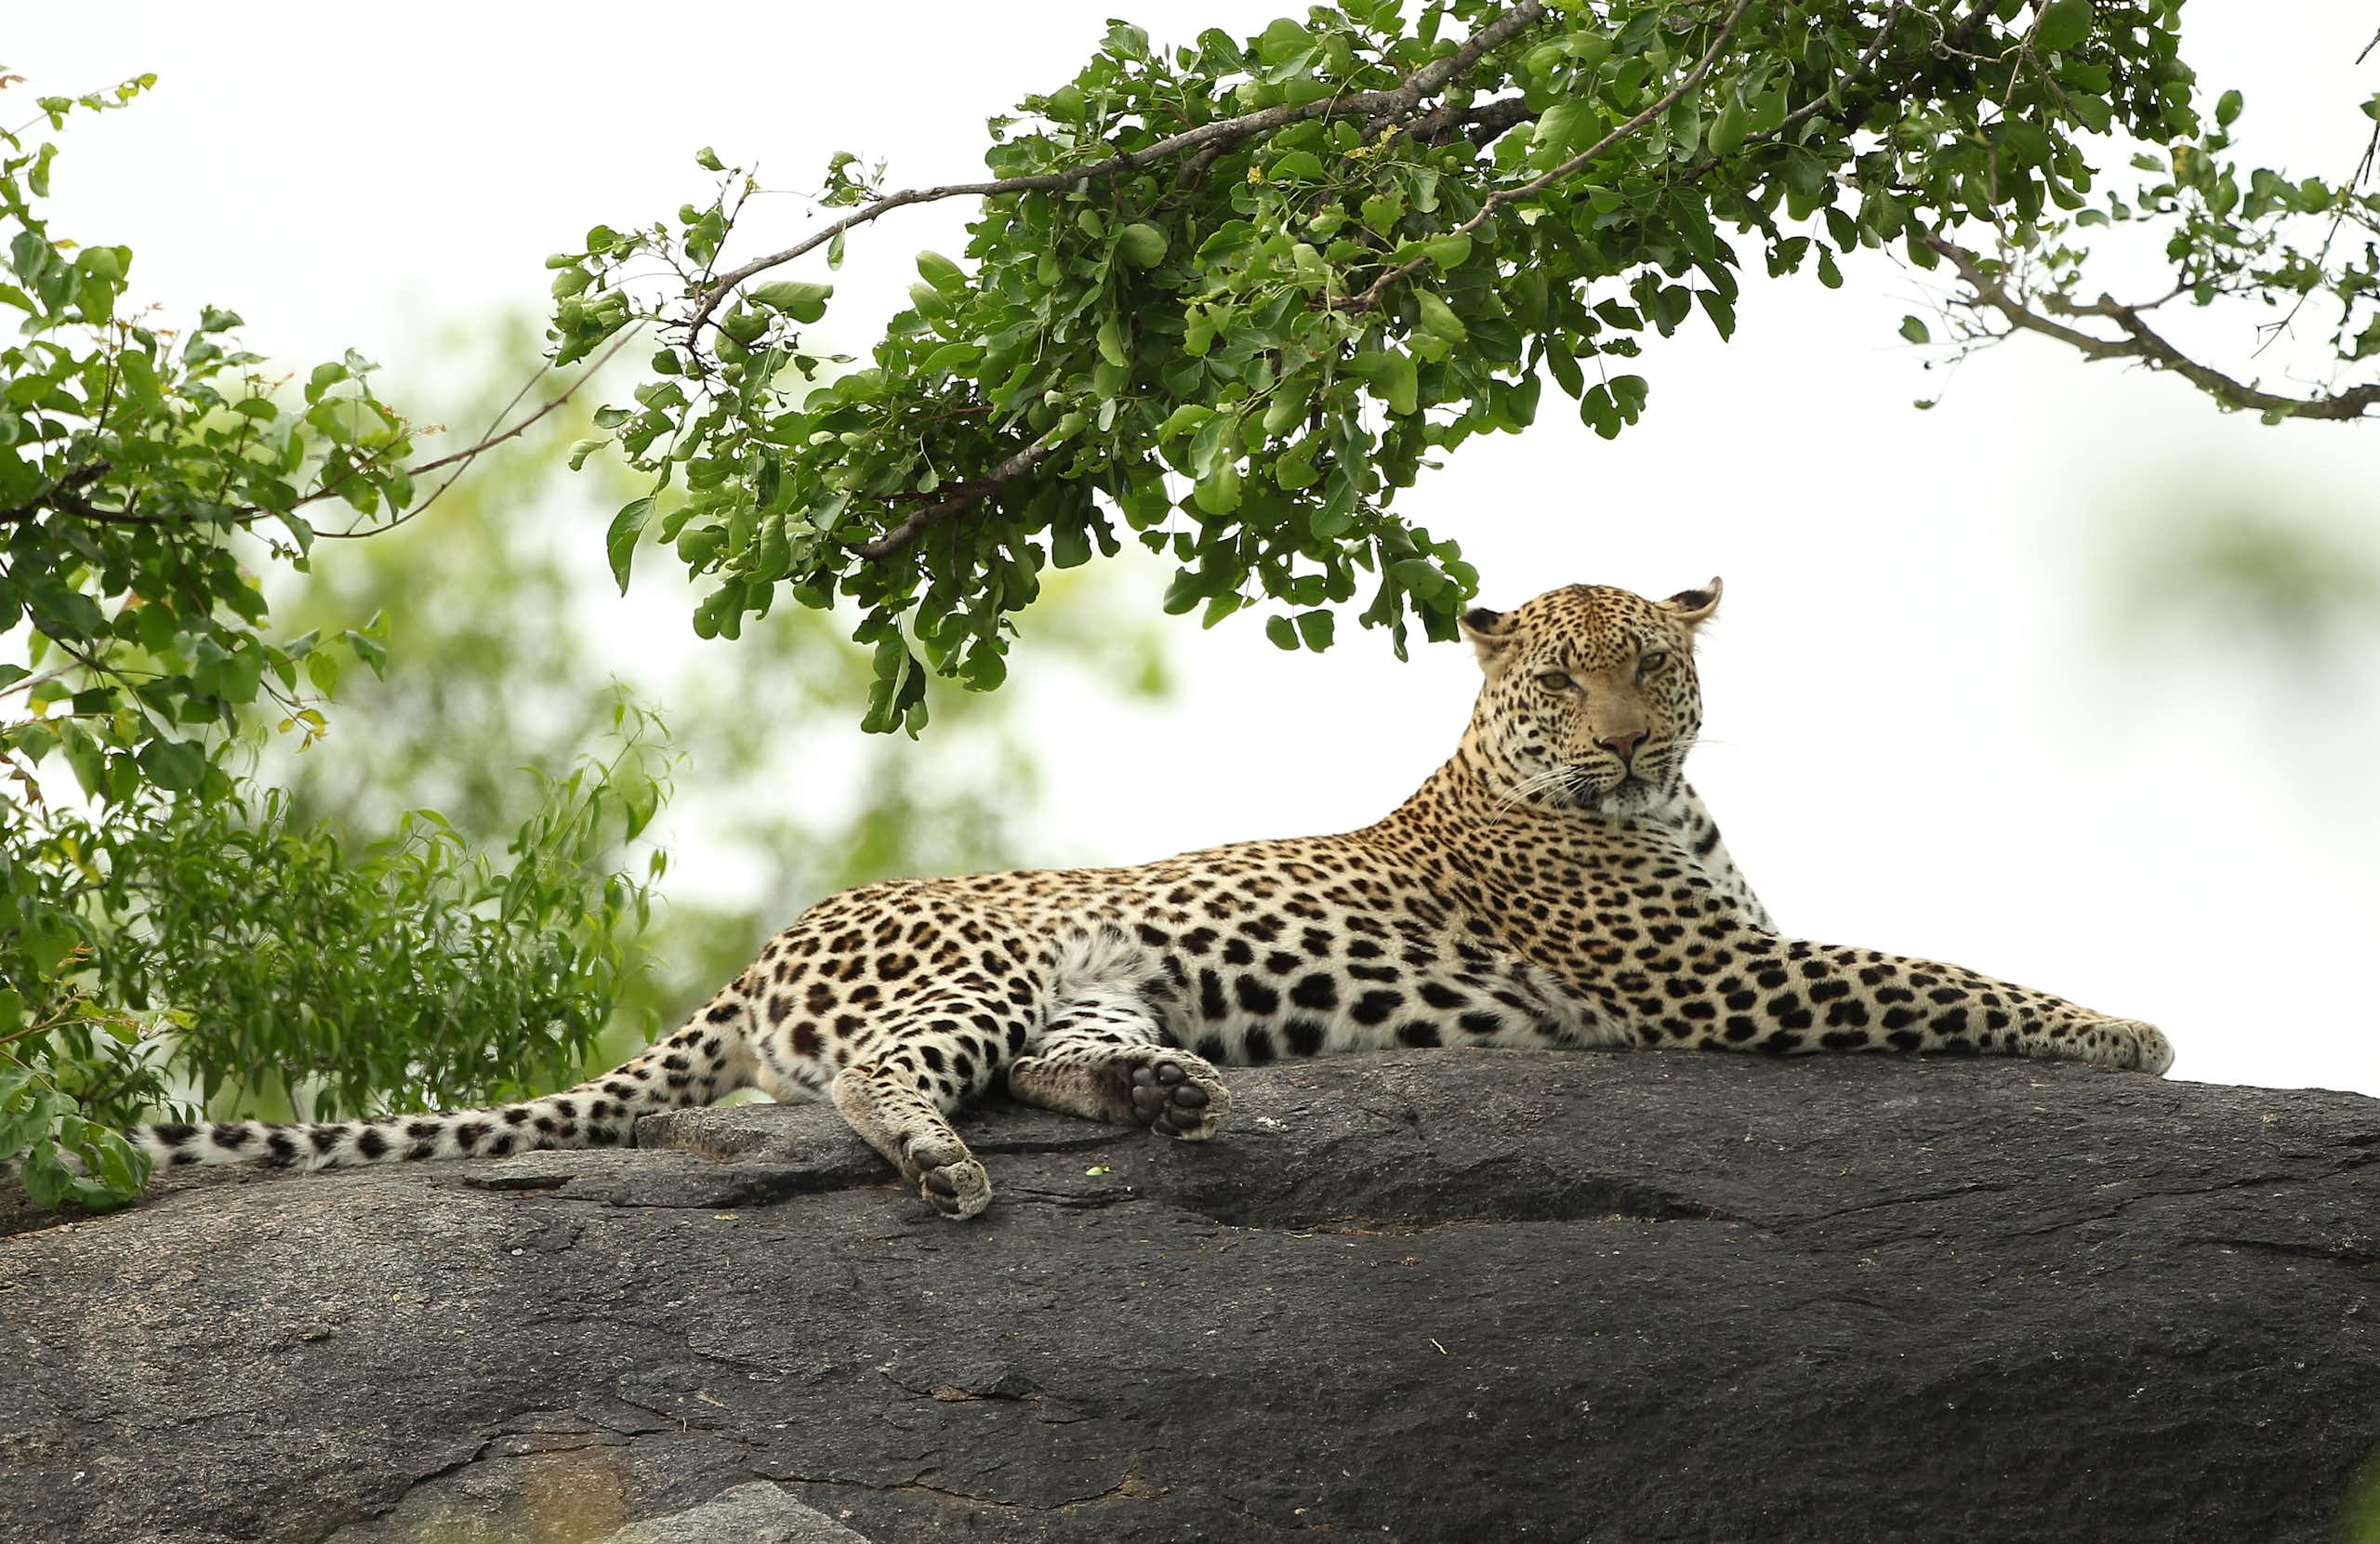 Leopard DNA study in South Africa traces ancestry to ice age – and will guide conservation